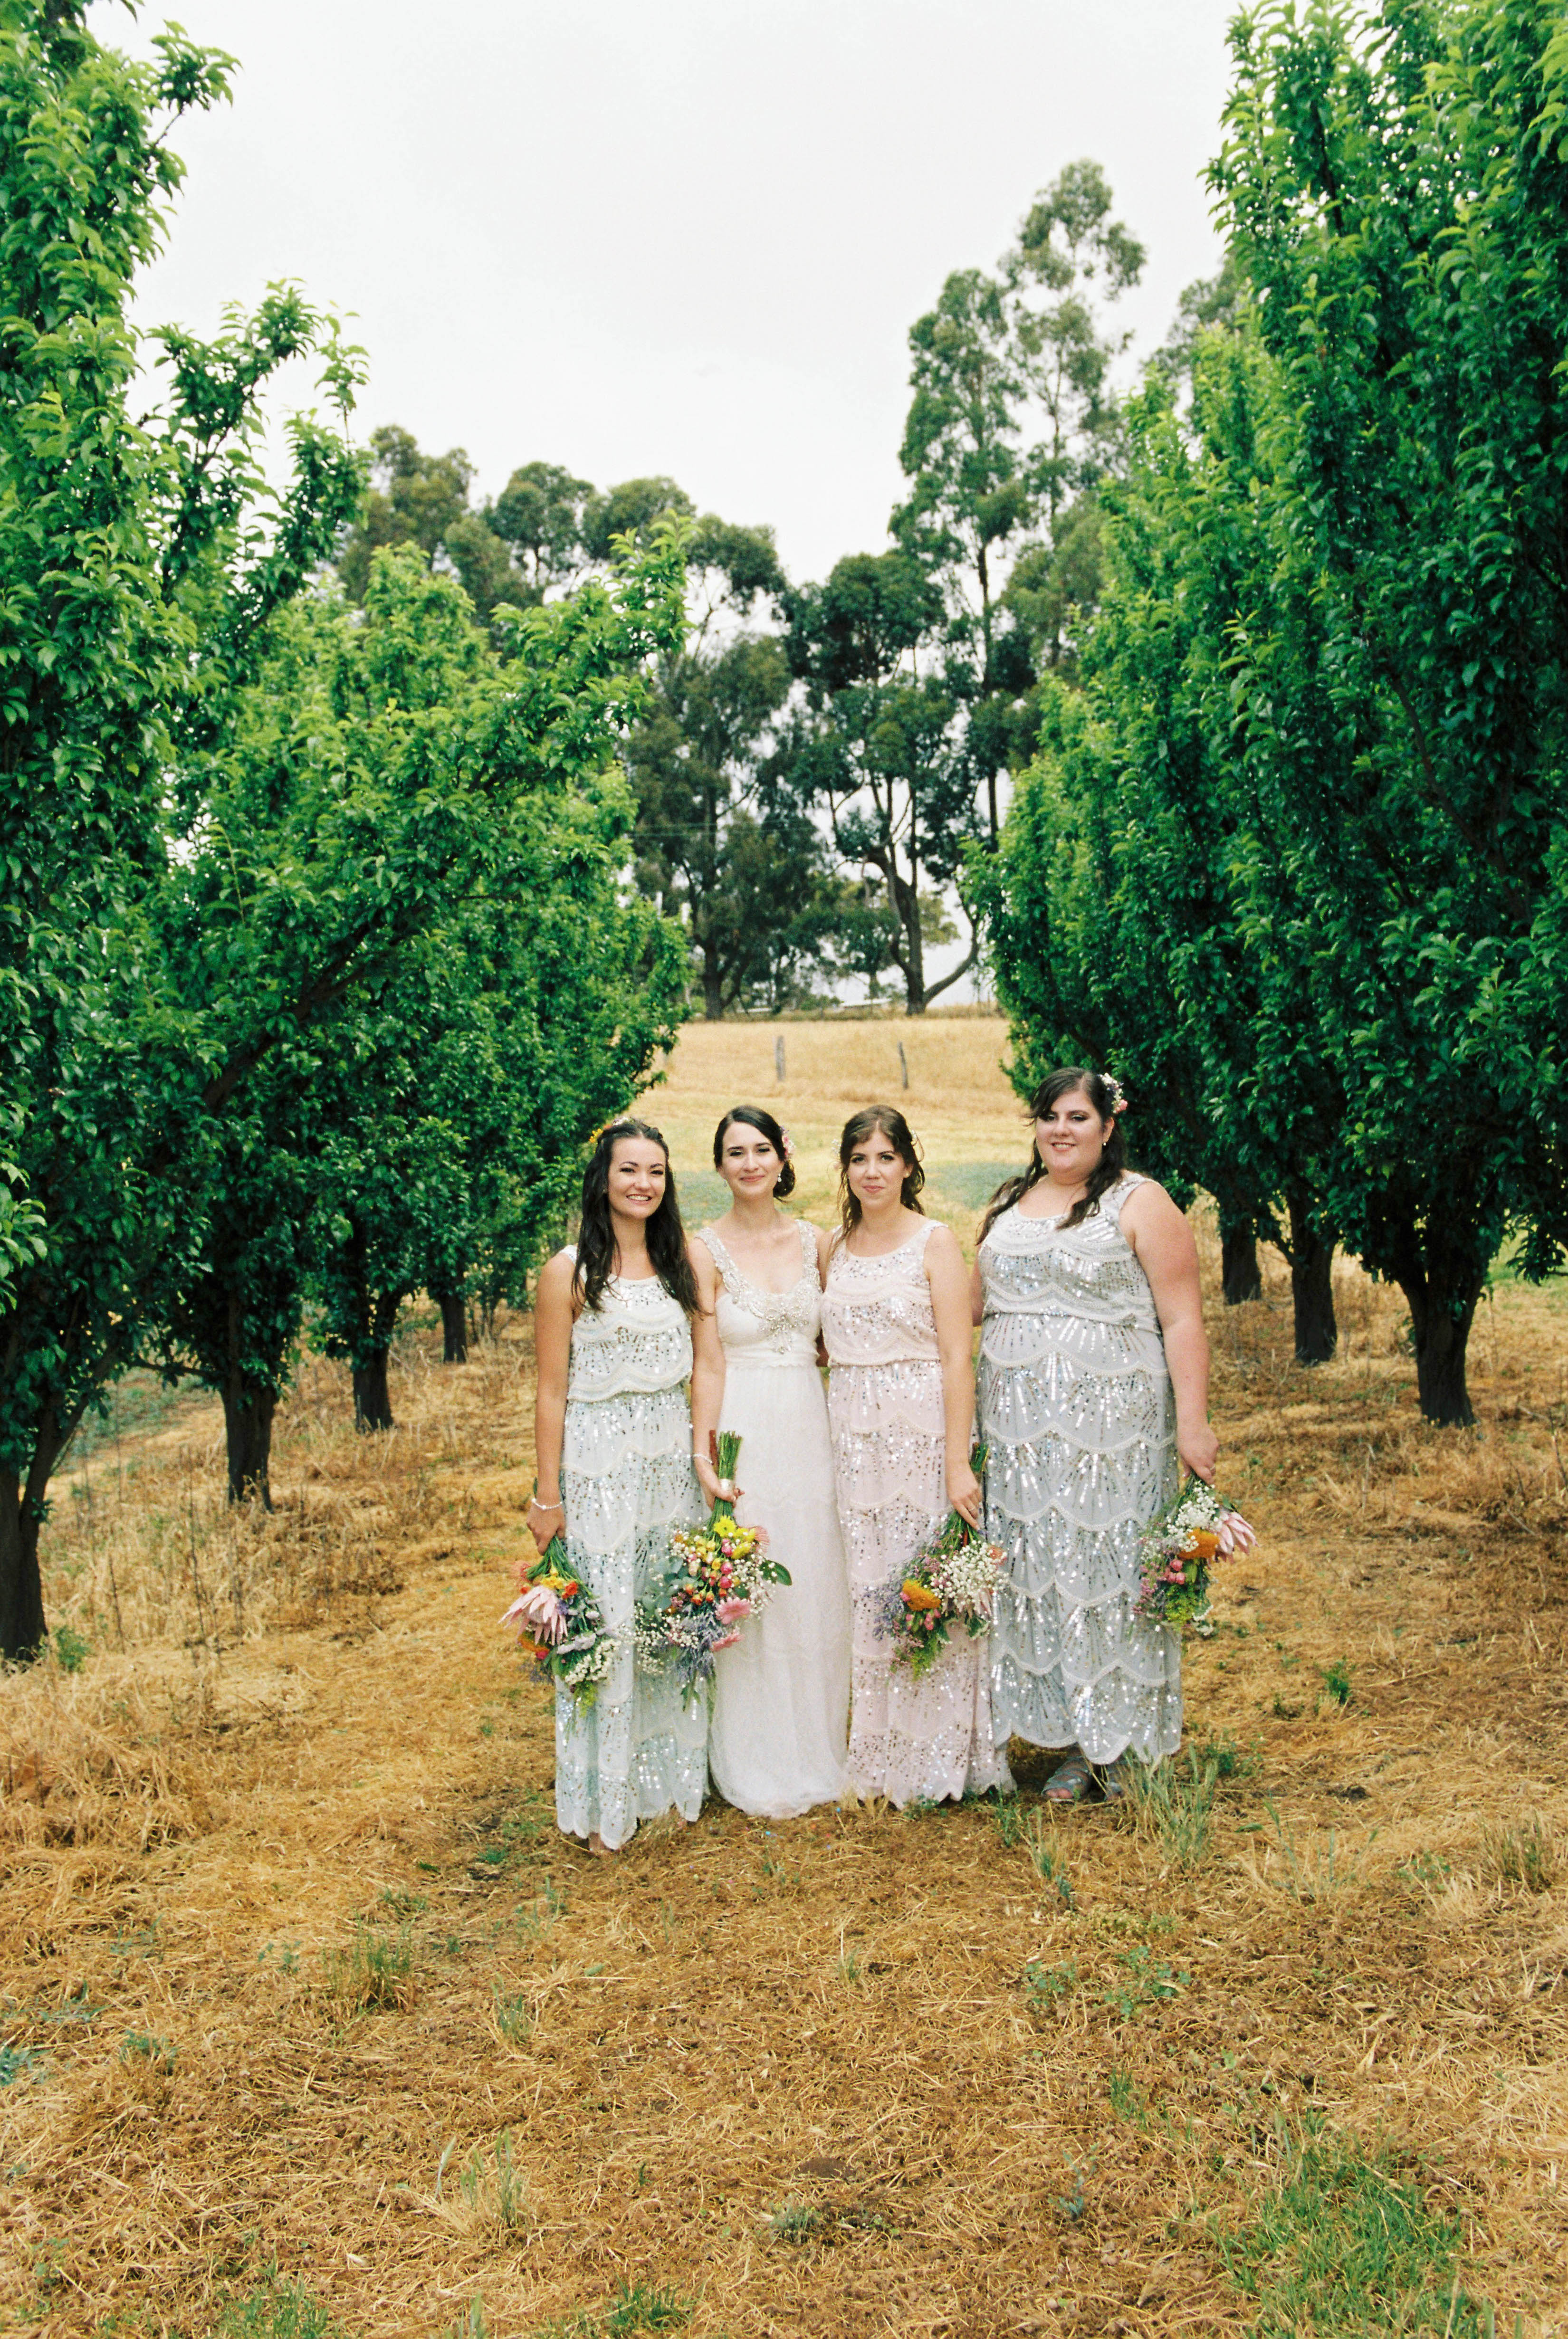 A natural wedding portrait of a bride with her bridesmaids on the south west family farm